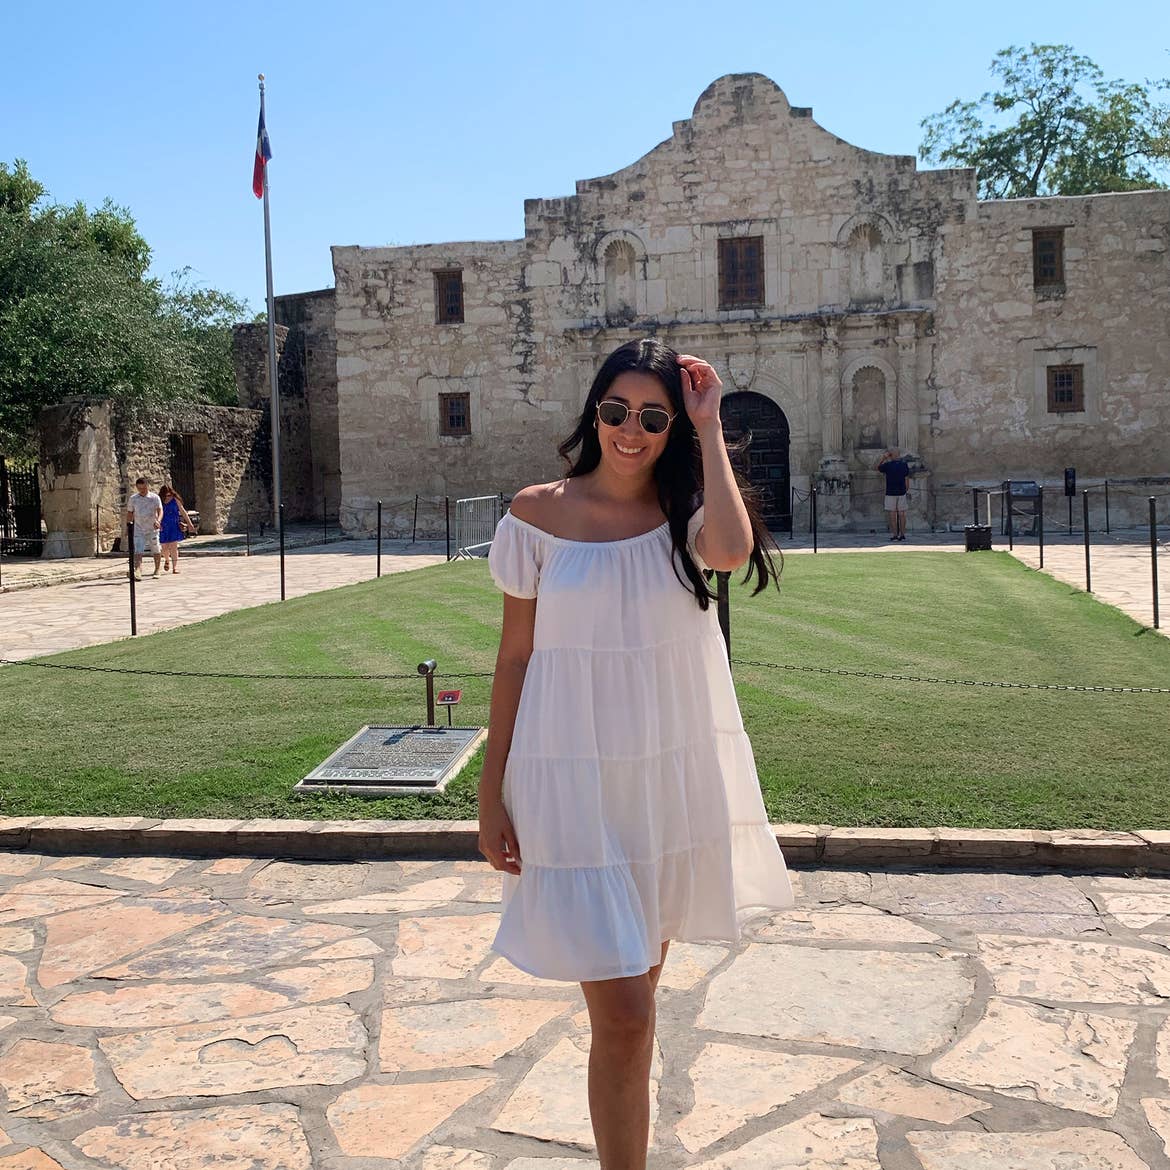 A woman in a white sundress and sunglasses stands in front of the Alamo exterior in Texas.